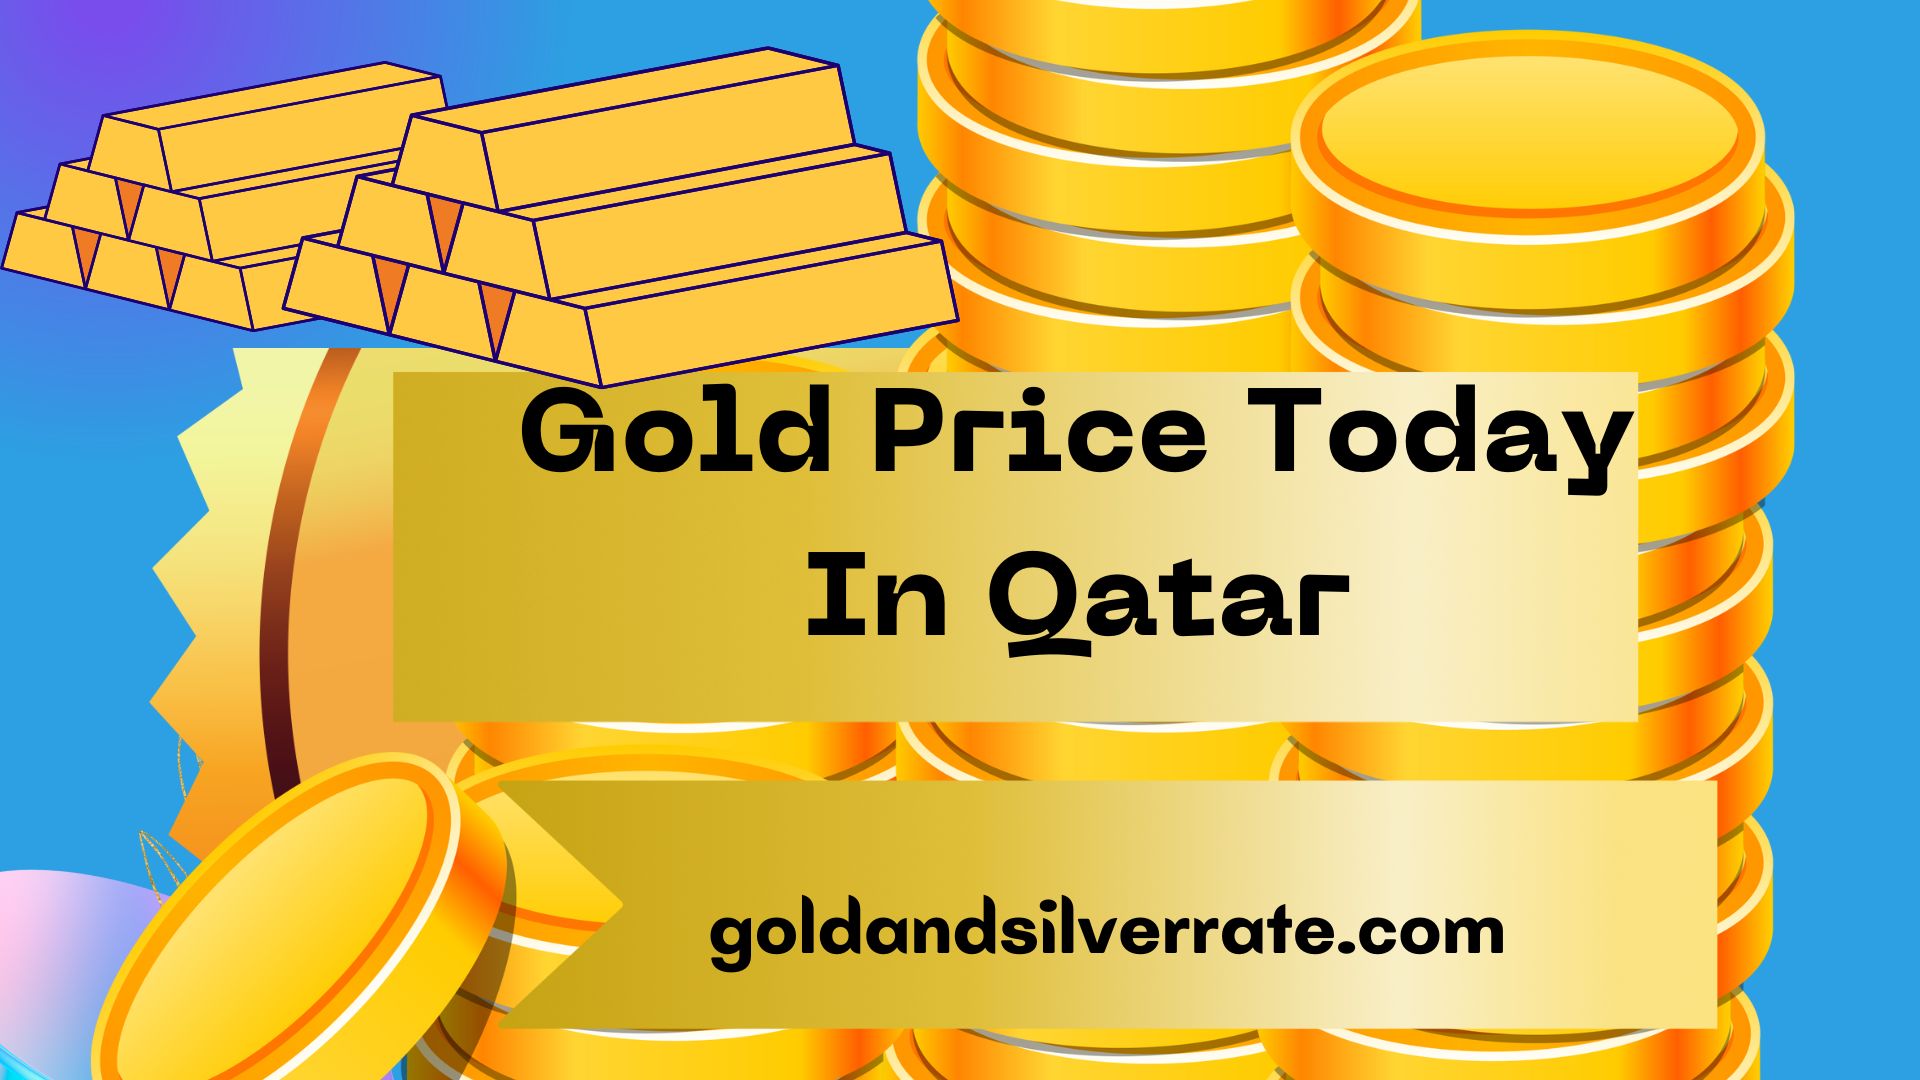 Gold Price Today In Qatar